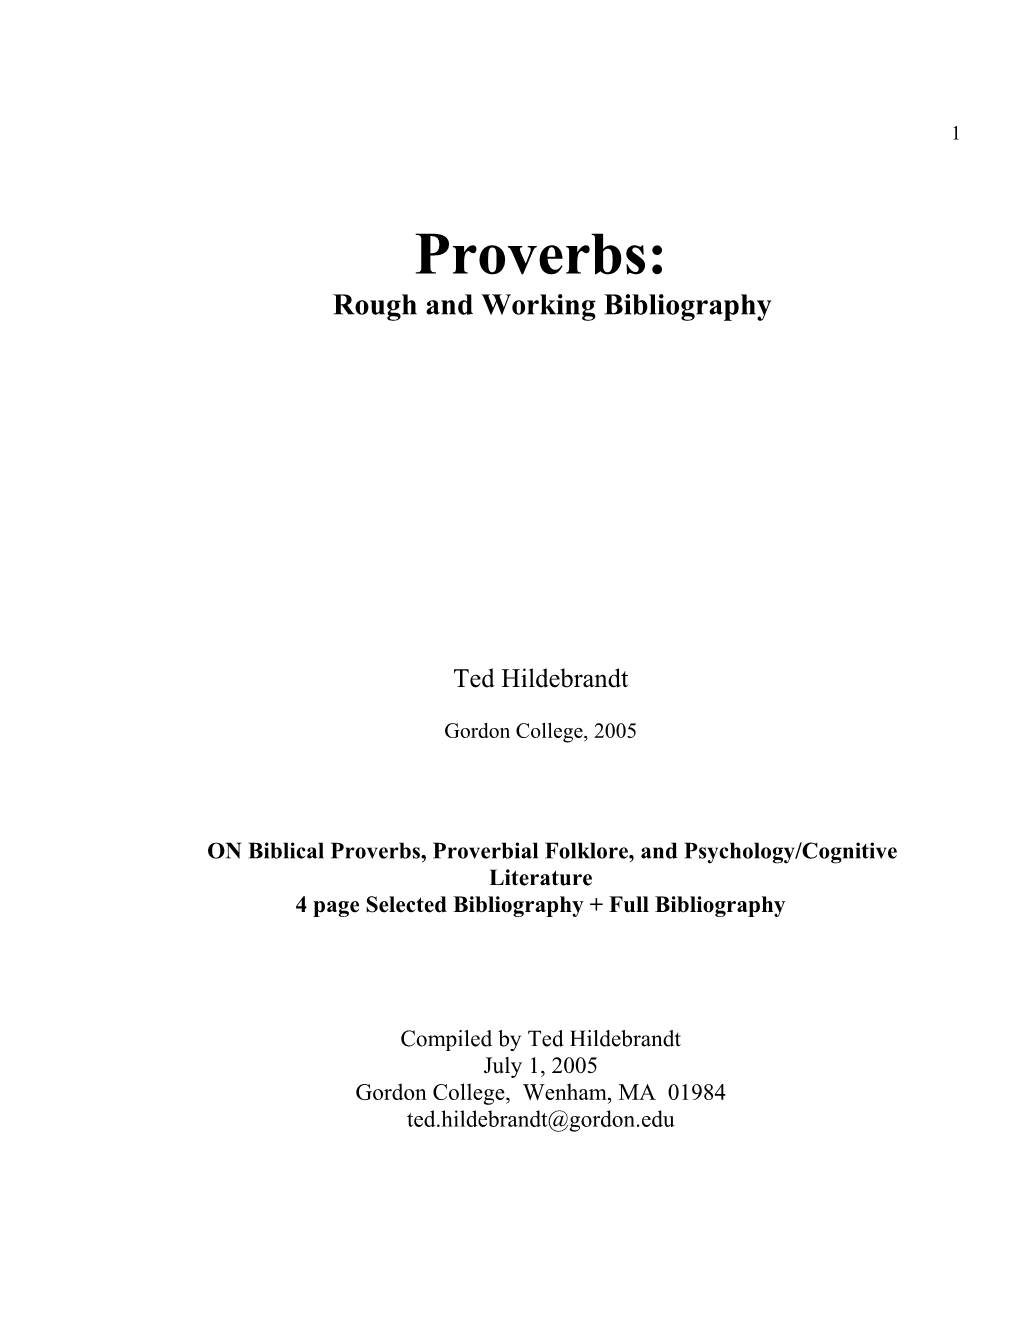 Proverbs a Rough and Working Bibliography (2005)